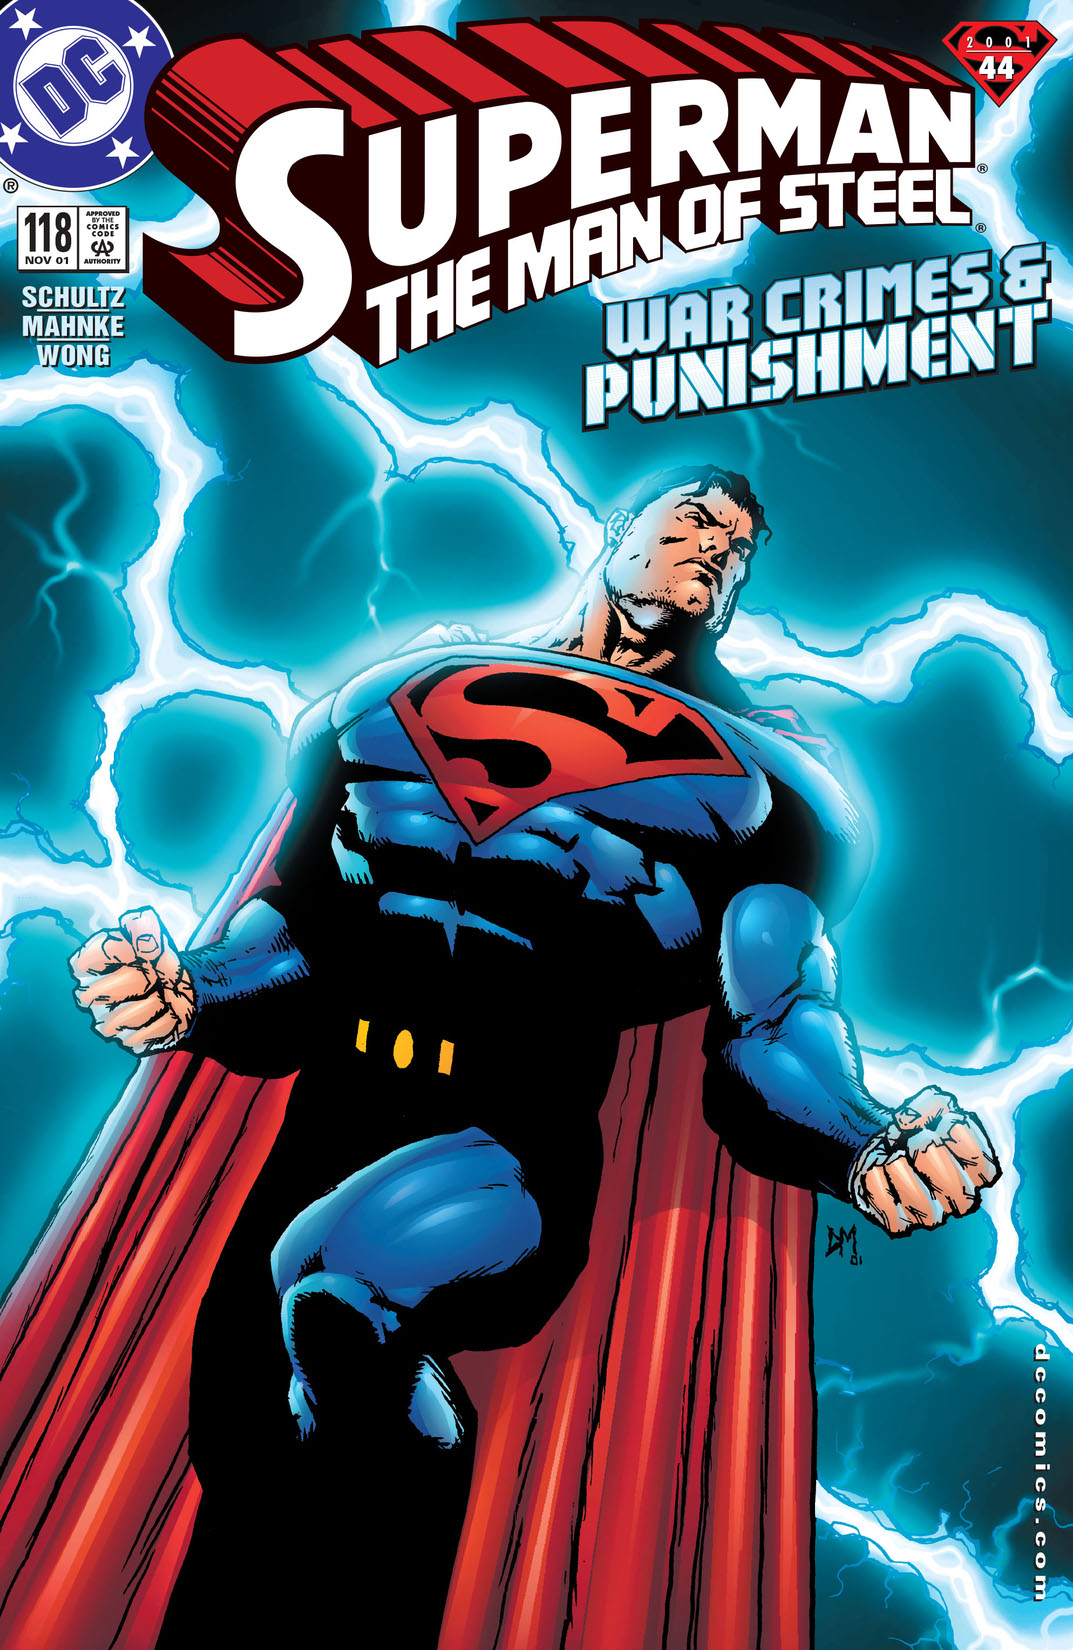 Superman: The Man of Steel #118 preview images